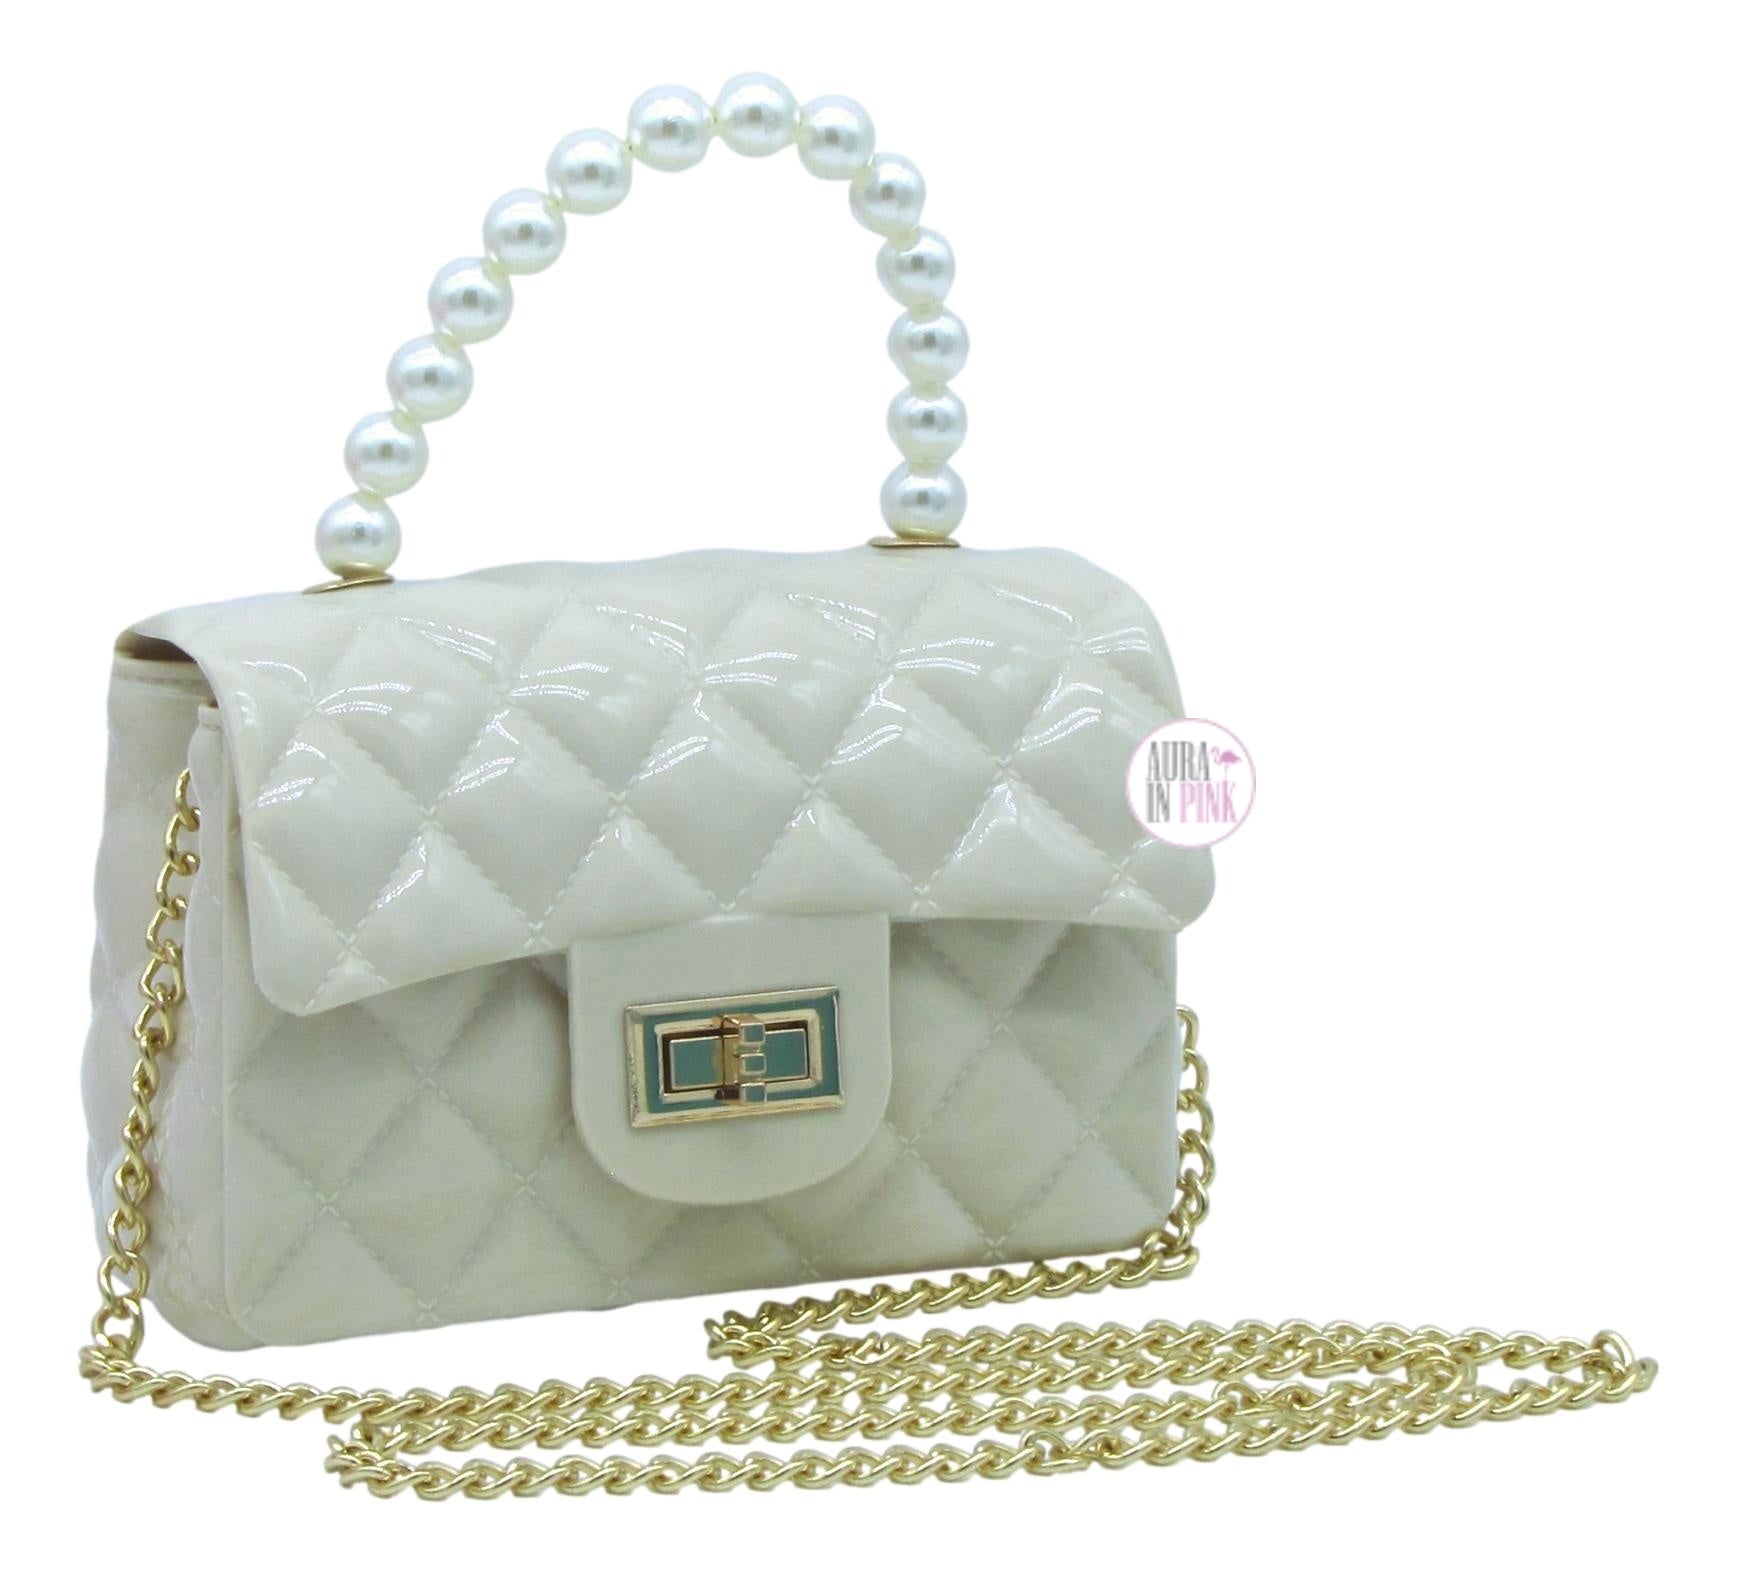 chanel purse with pearls